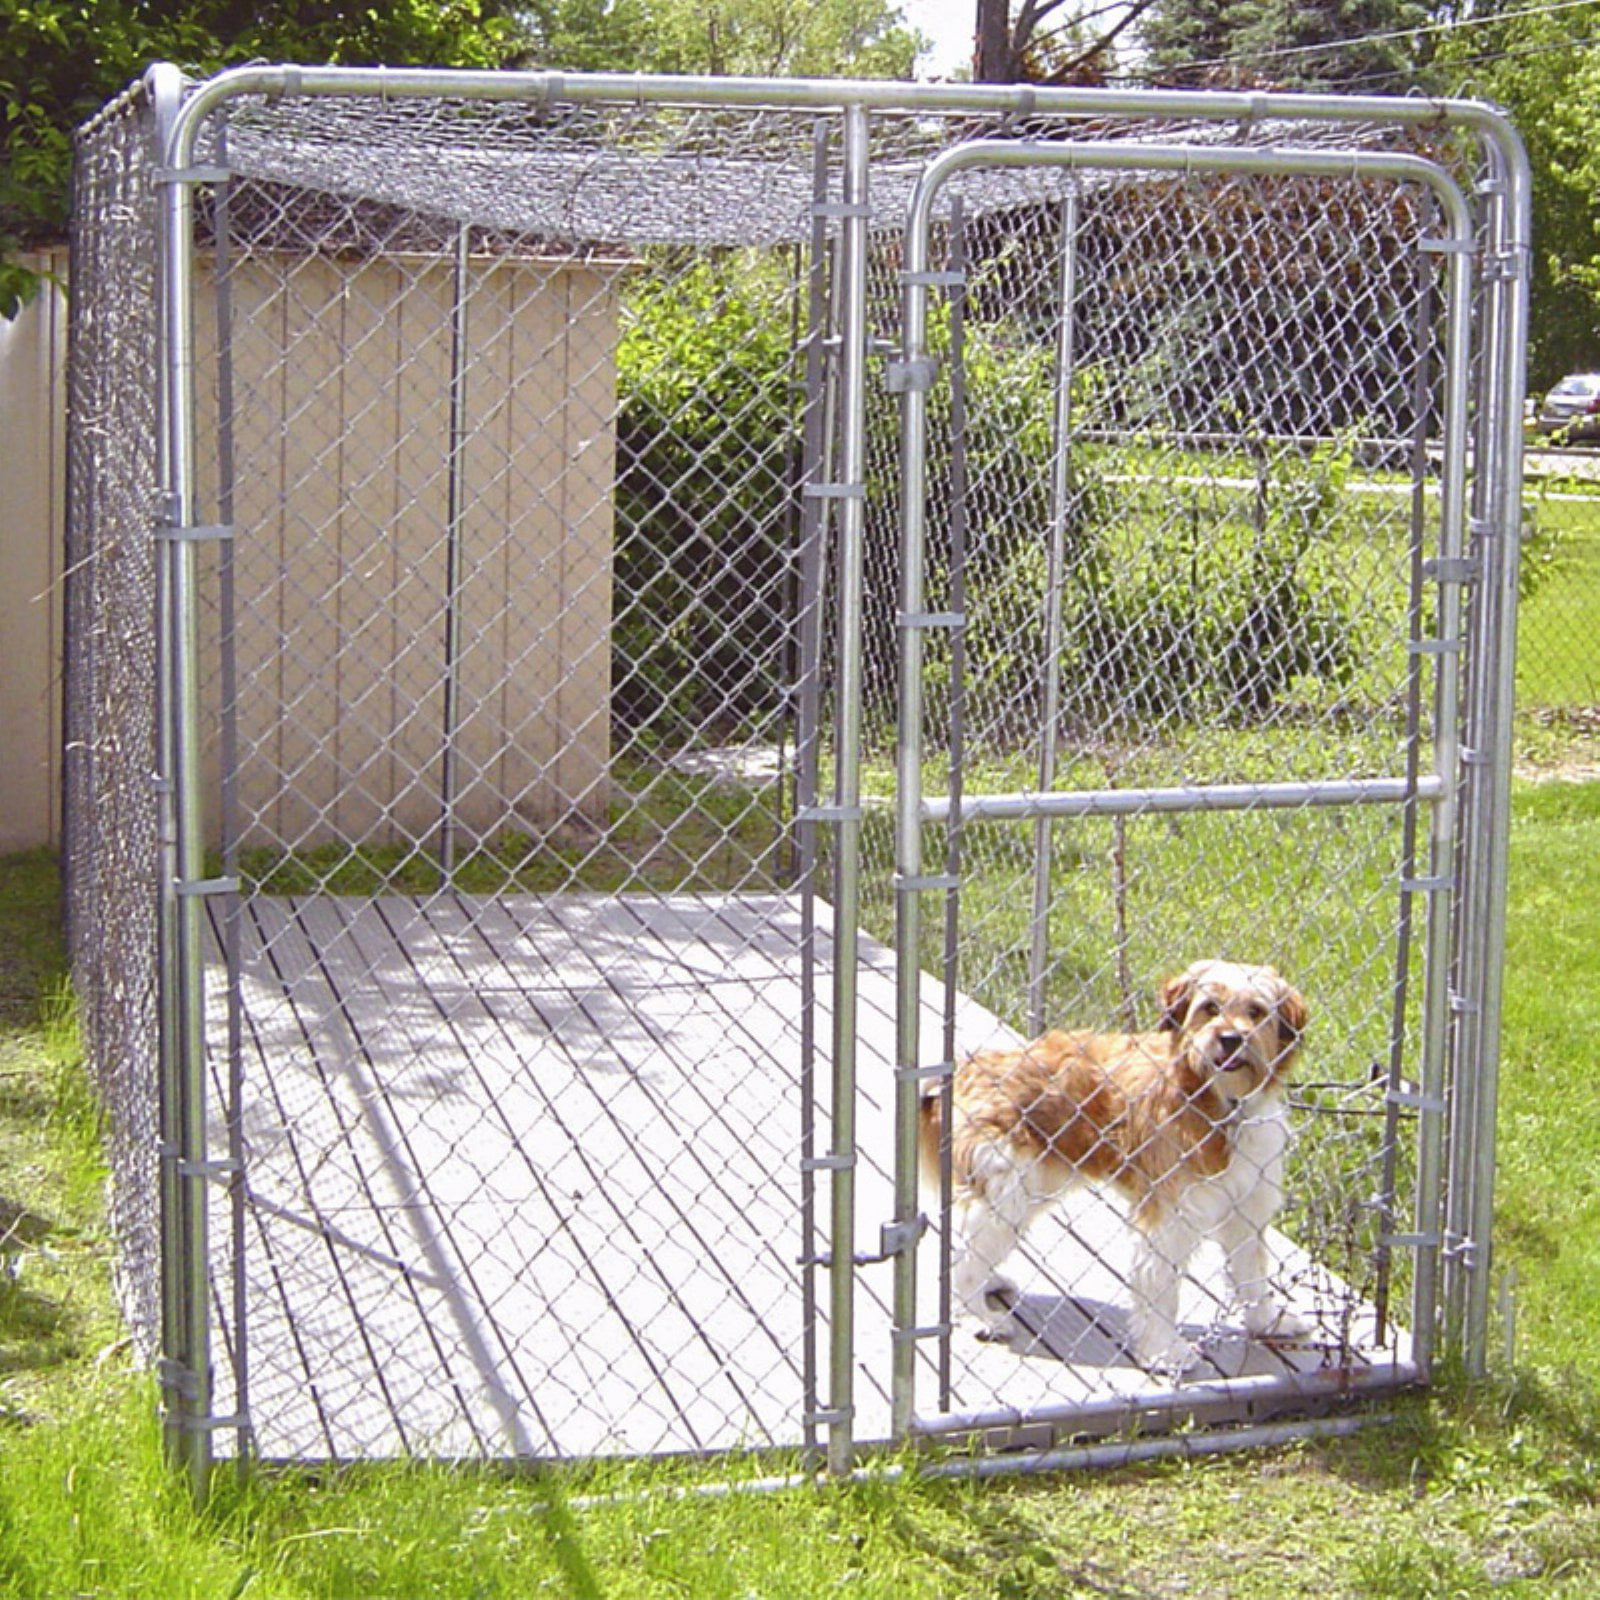 What Flooring Options Work Best For 10x10 Dog Kennels?